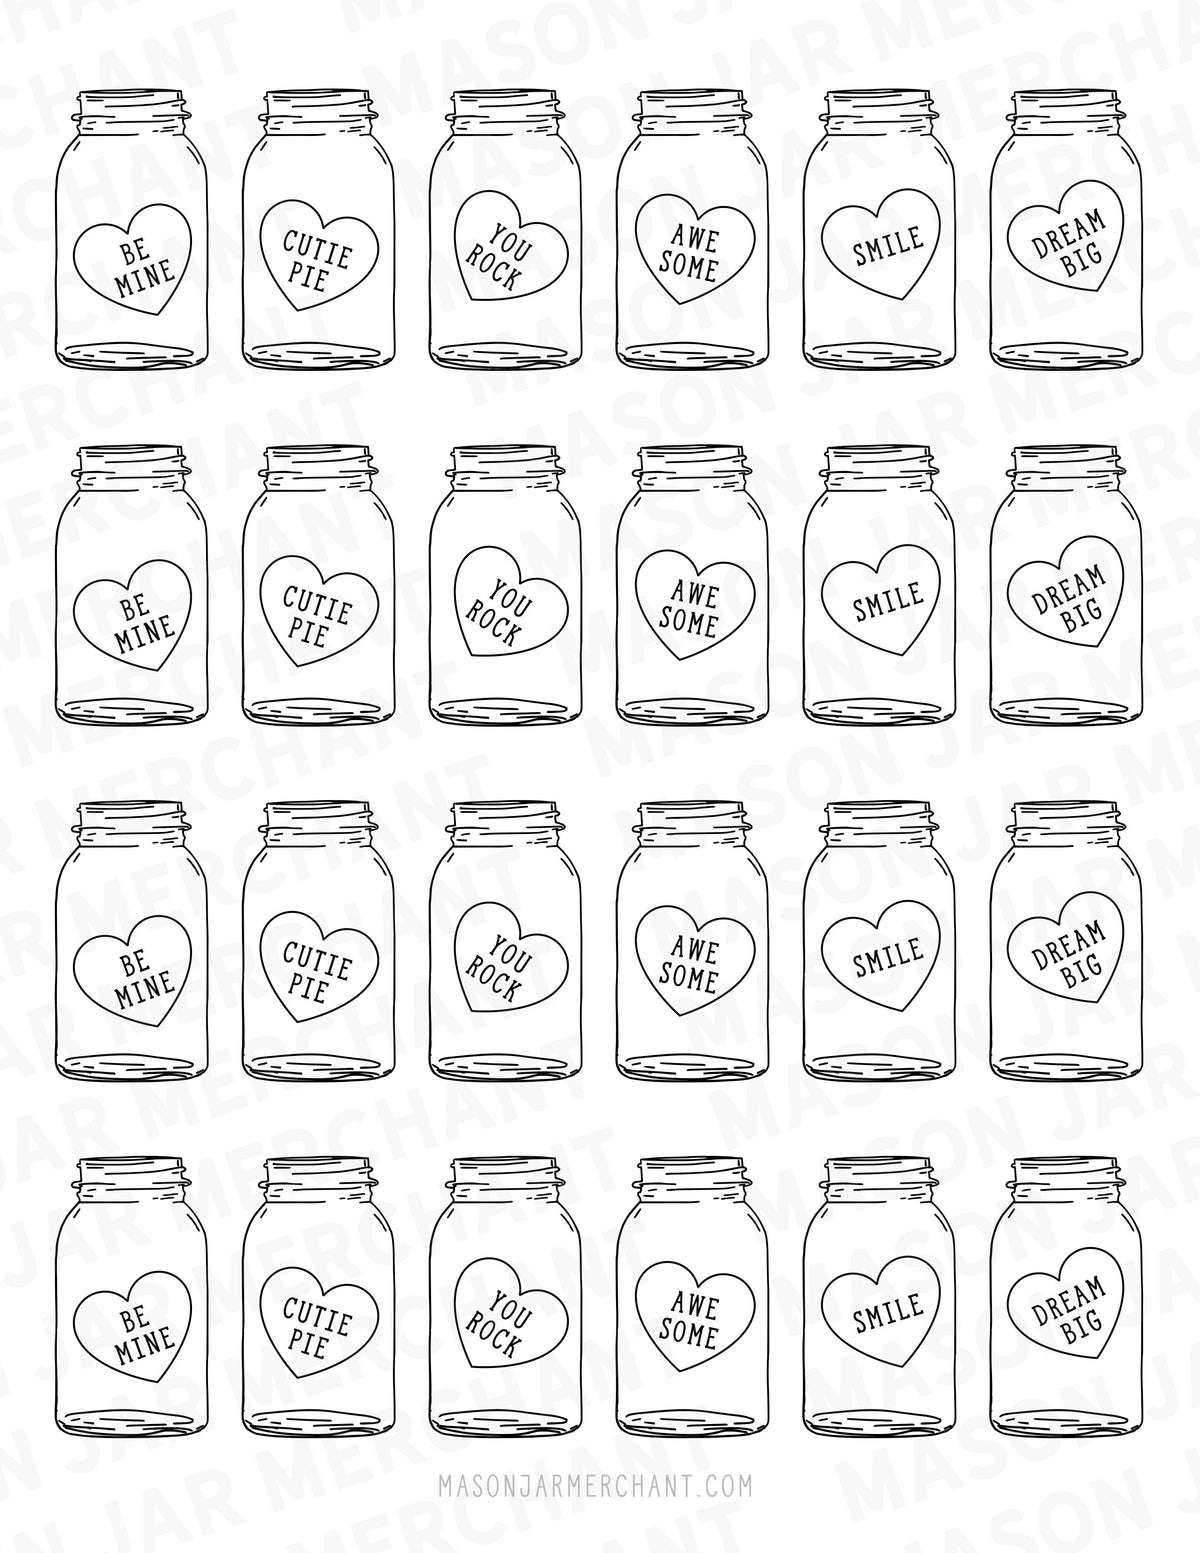 black and white candy heart mason jar shaped valentines Studio3 download color and cut and use as gift tags